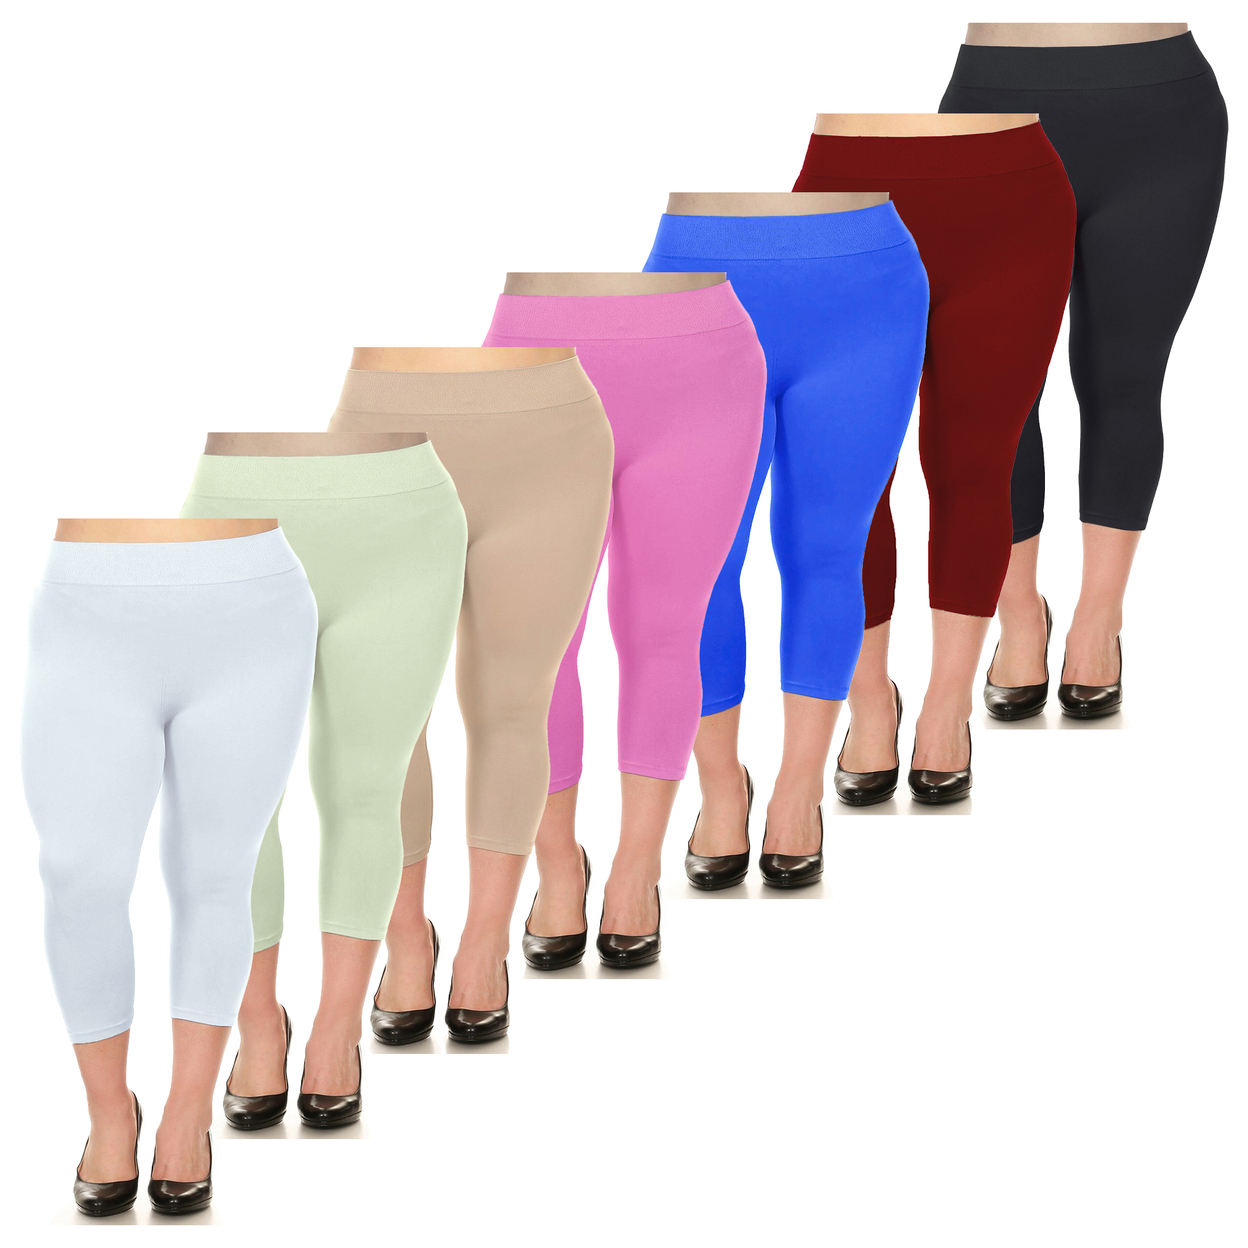 Women's Ultra-Soft High Waisted Smooth Stretch Active Yoga Capri Leggings Plus Size Available - Red, 4x